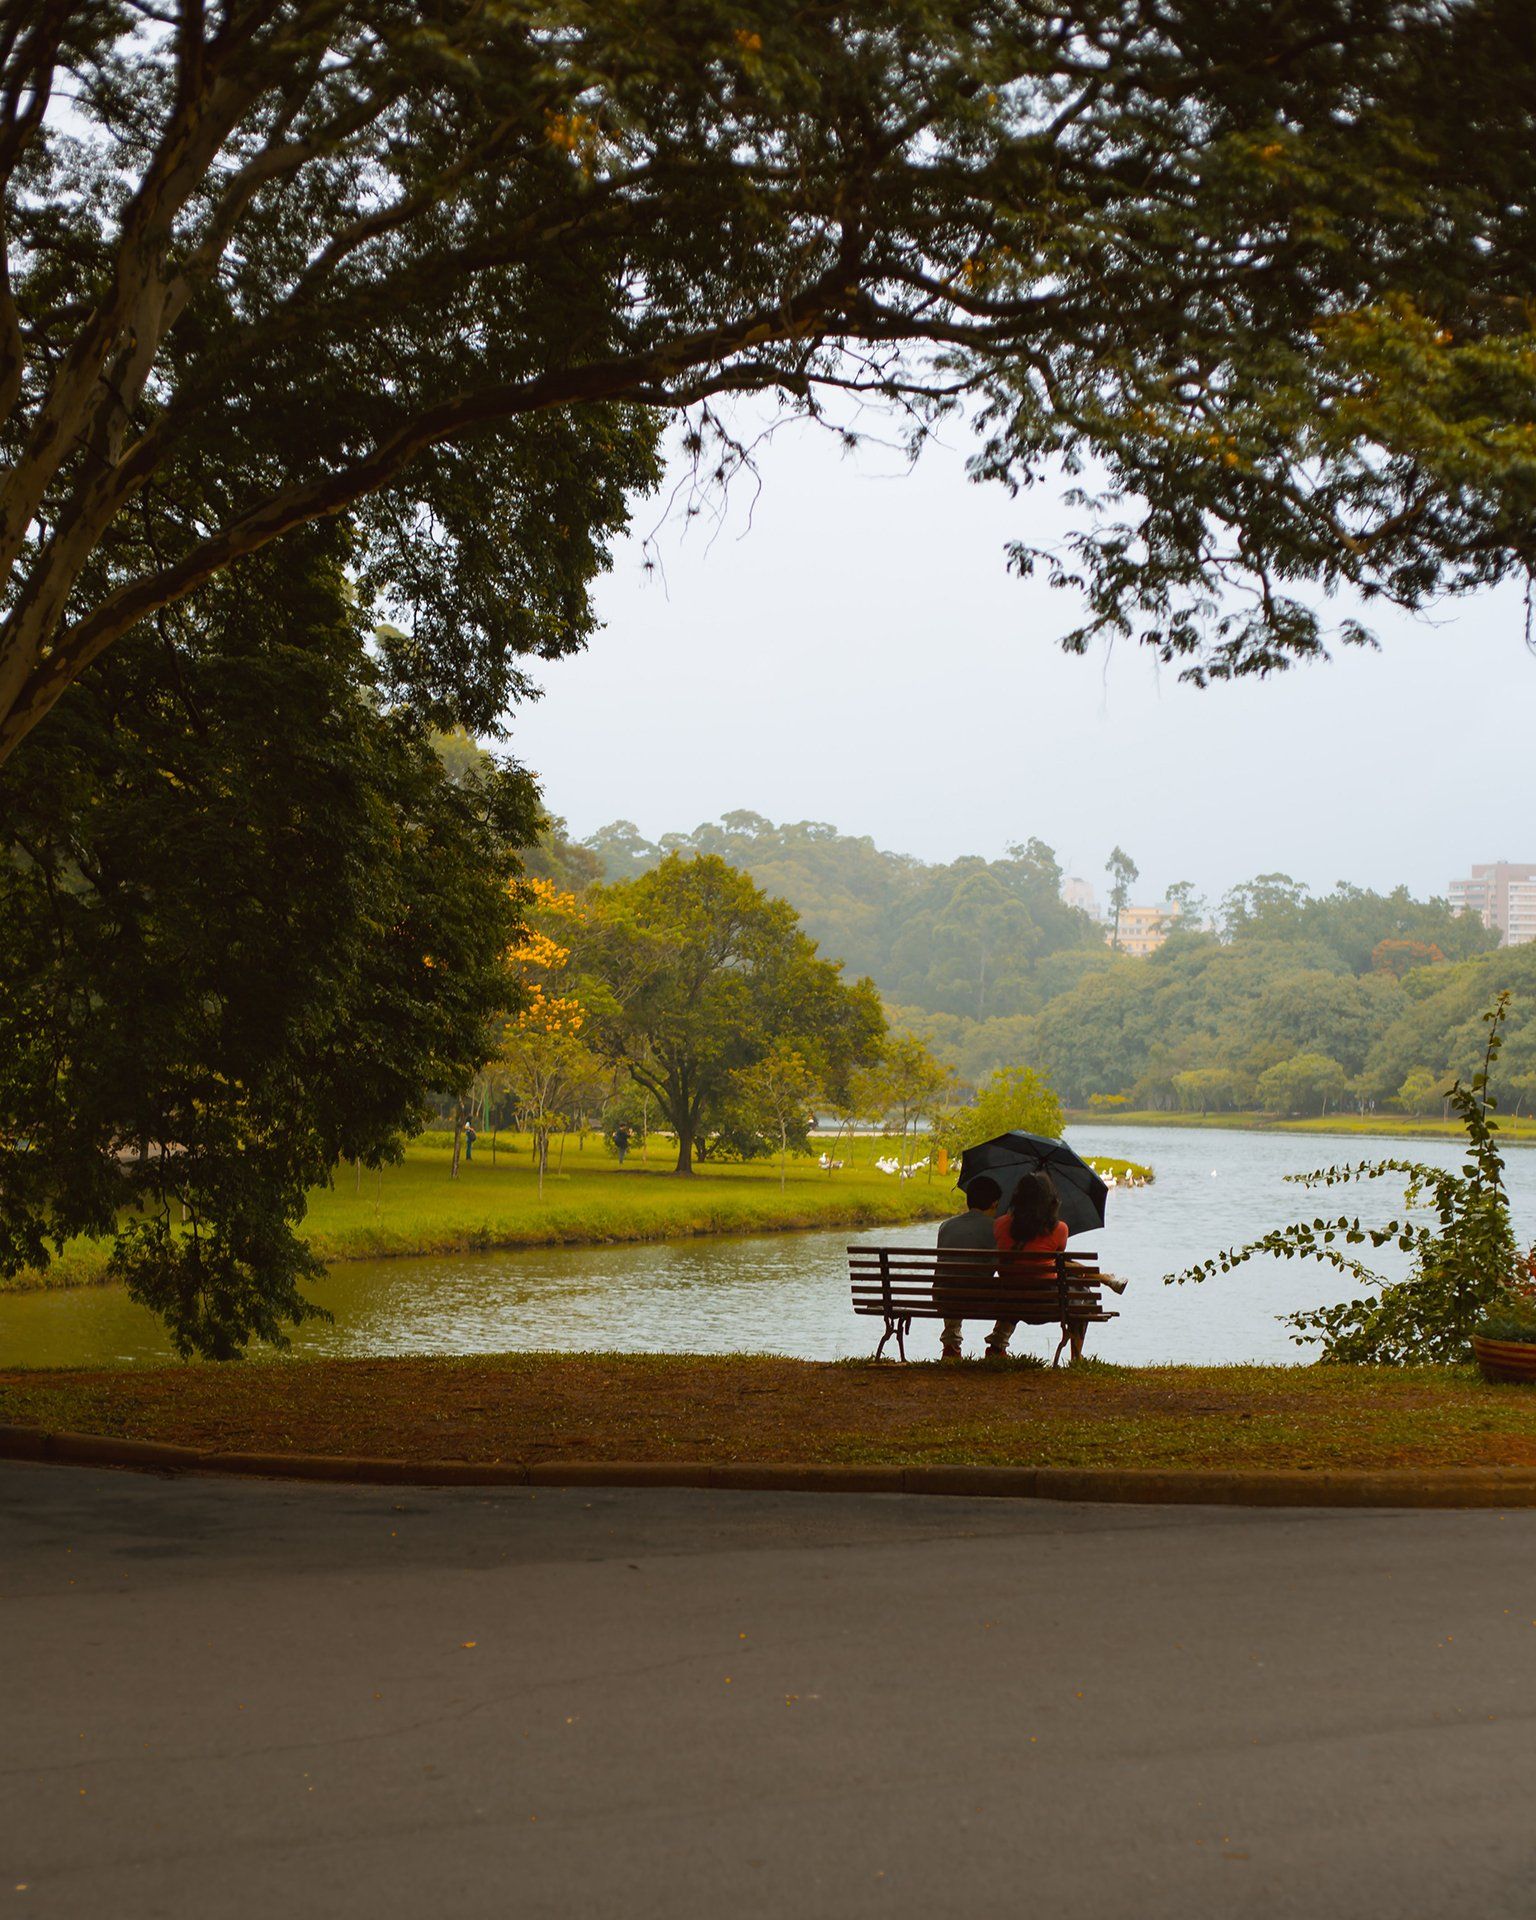 A couple sits on a bench to contemplate the Ibirapuera Park - Photo by Rogétrio on Unsplash